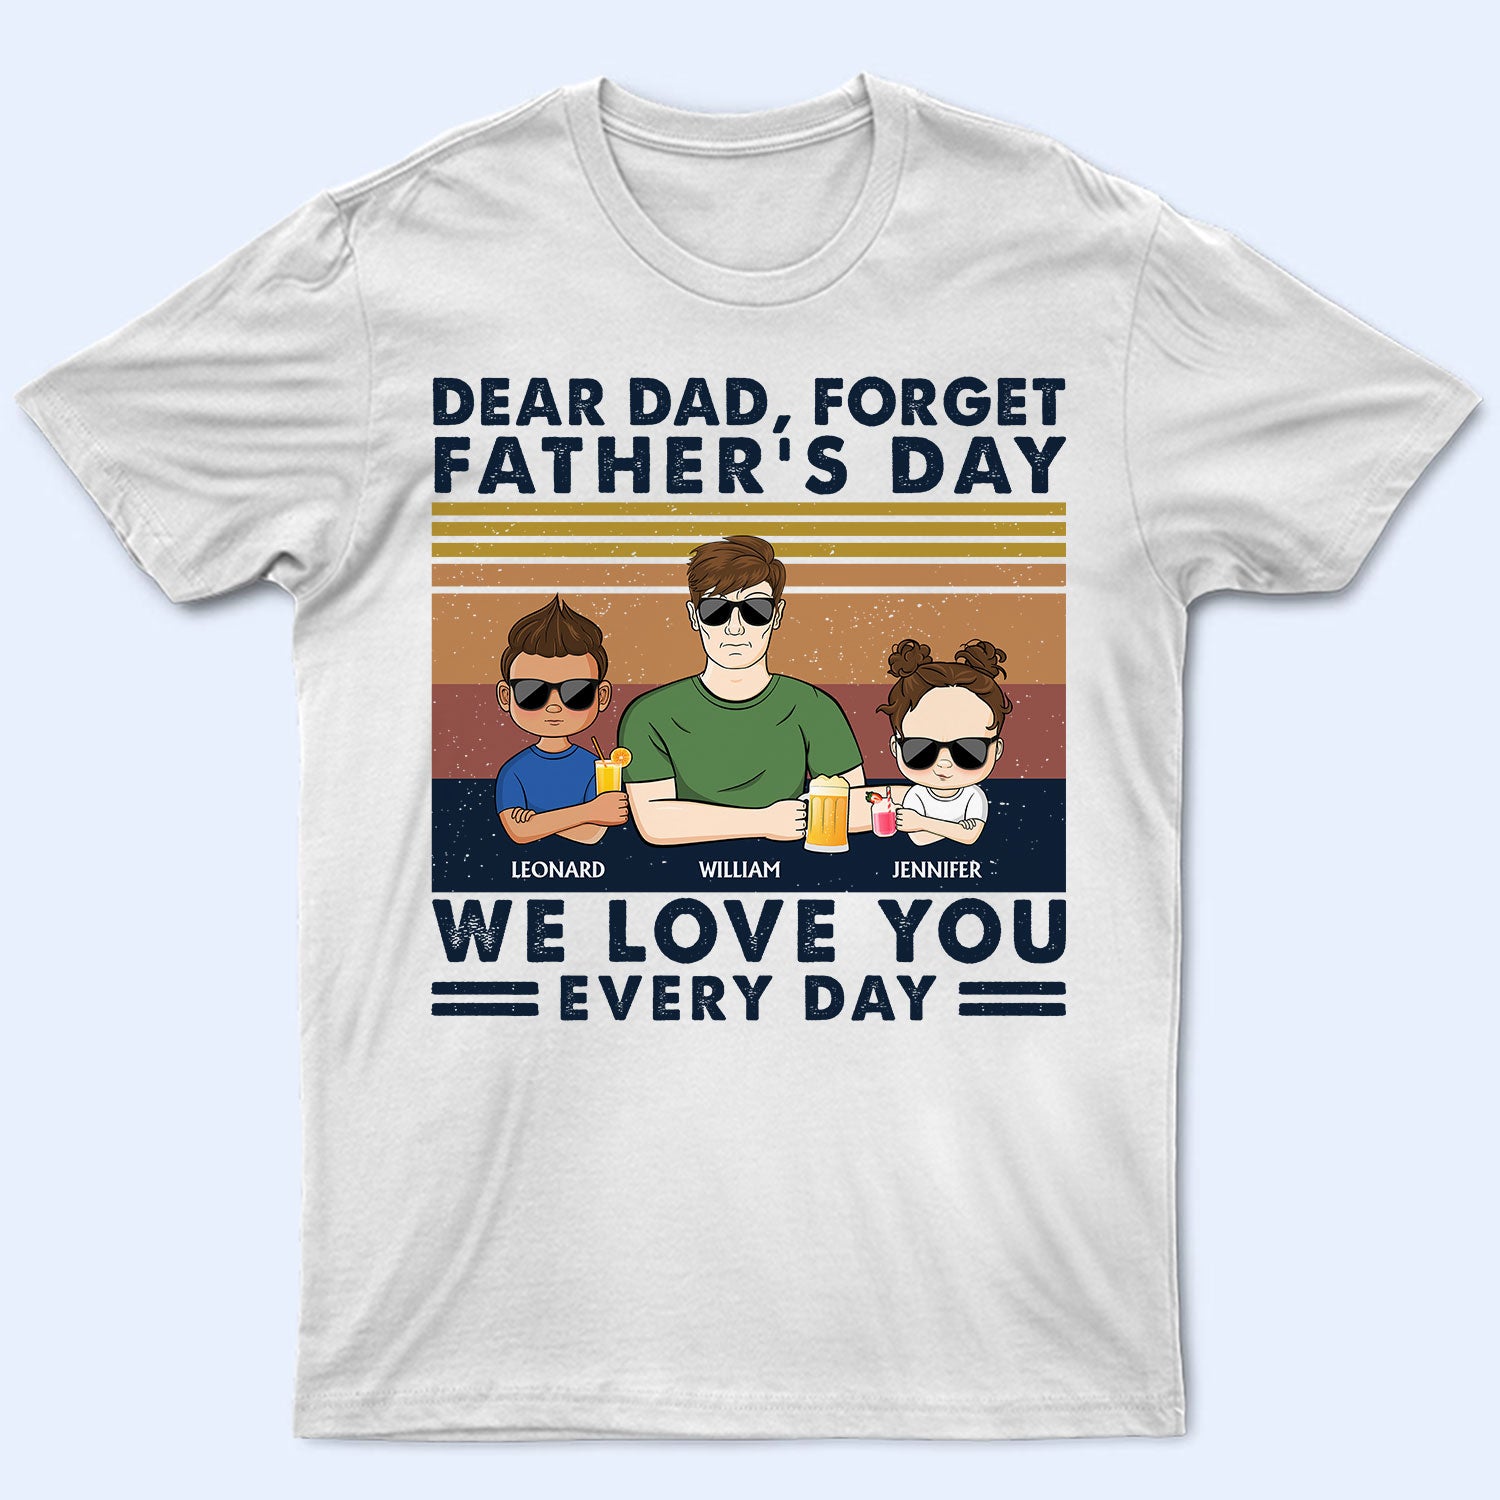 Dear Dad We Love You Every Day Retro Young - Birthday, Loving Gift For Father, Grandpa, Grandfather - Personalized Custom T Shirt